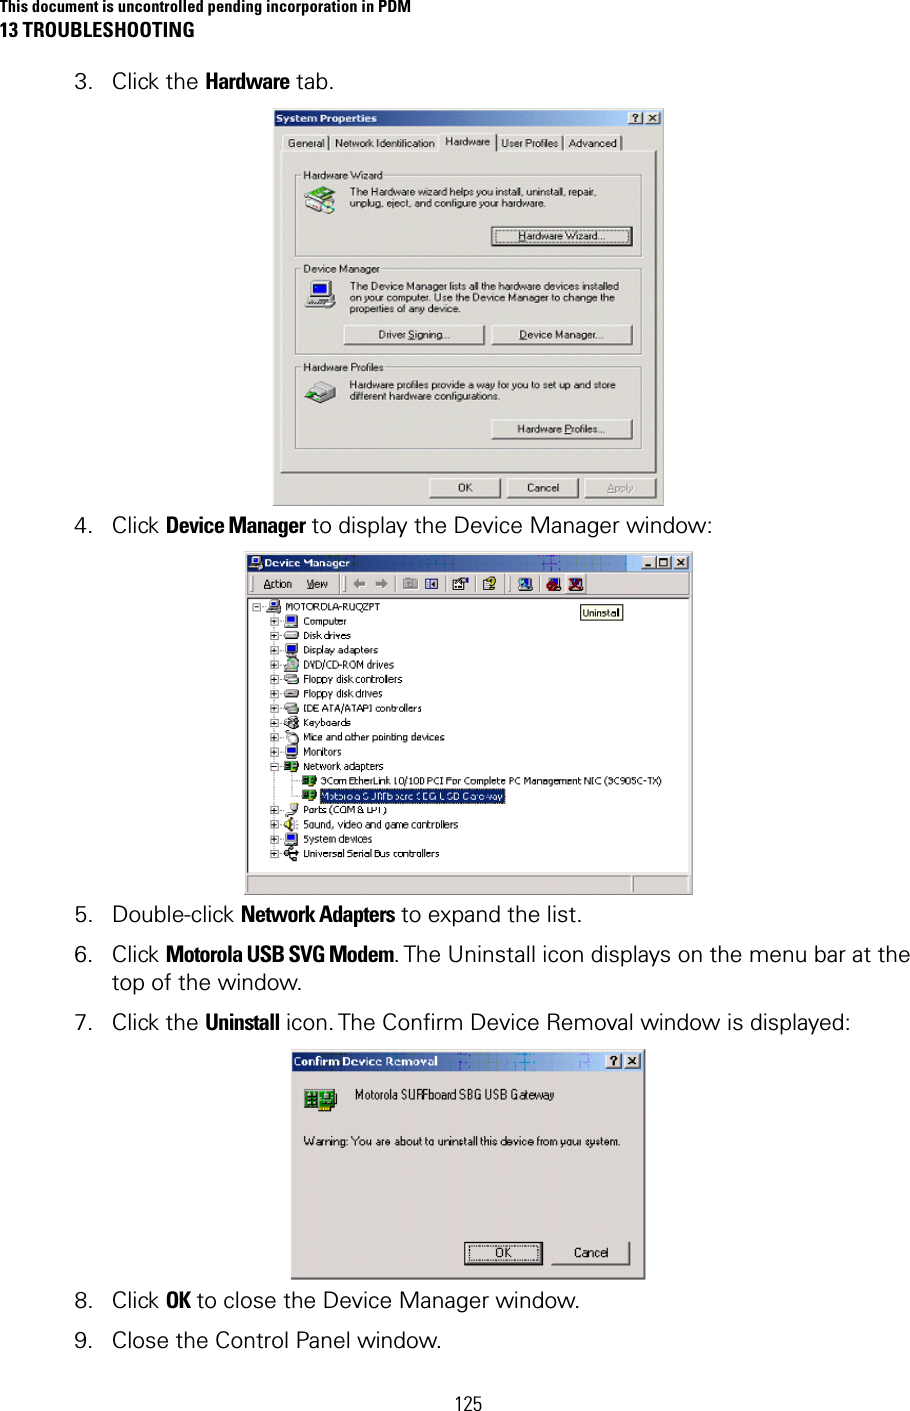 This document is uncontrolled pending incorporation in PDM 13 TROUBLESHOOTING  125 3. Click the Hardware tab.   4. Click Device Manager to display the Device Manager window:   5. Double-click Network Adapters to expand the list.  6. Click Motorola USB SVG Modem. The Uninstall icon displays on the menu bar at the top of the window.  7. Click the Uninstall icon. The Confirm Device Removal window is displayed:   8. Click OK to close the Device Manager window. 9. Close the Control Panel window. 